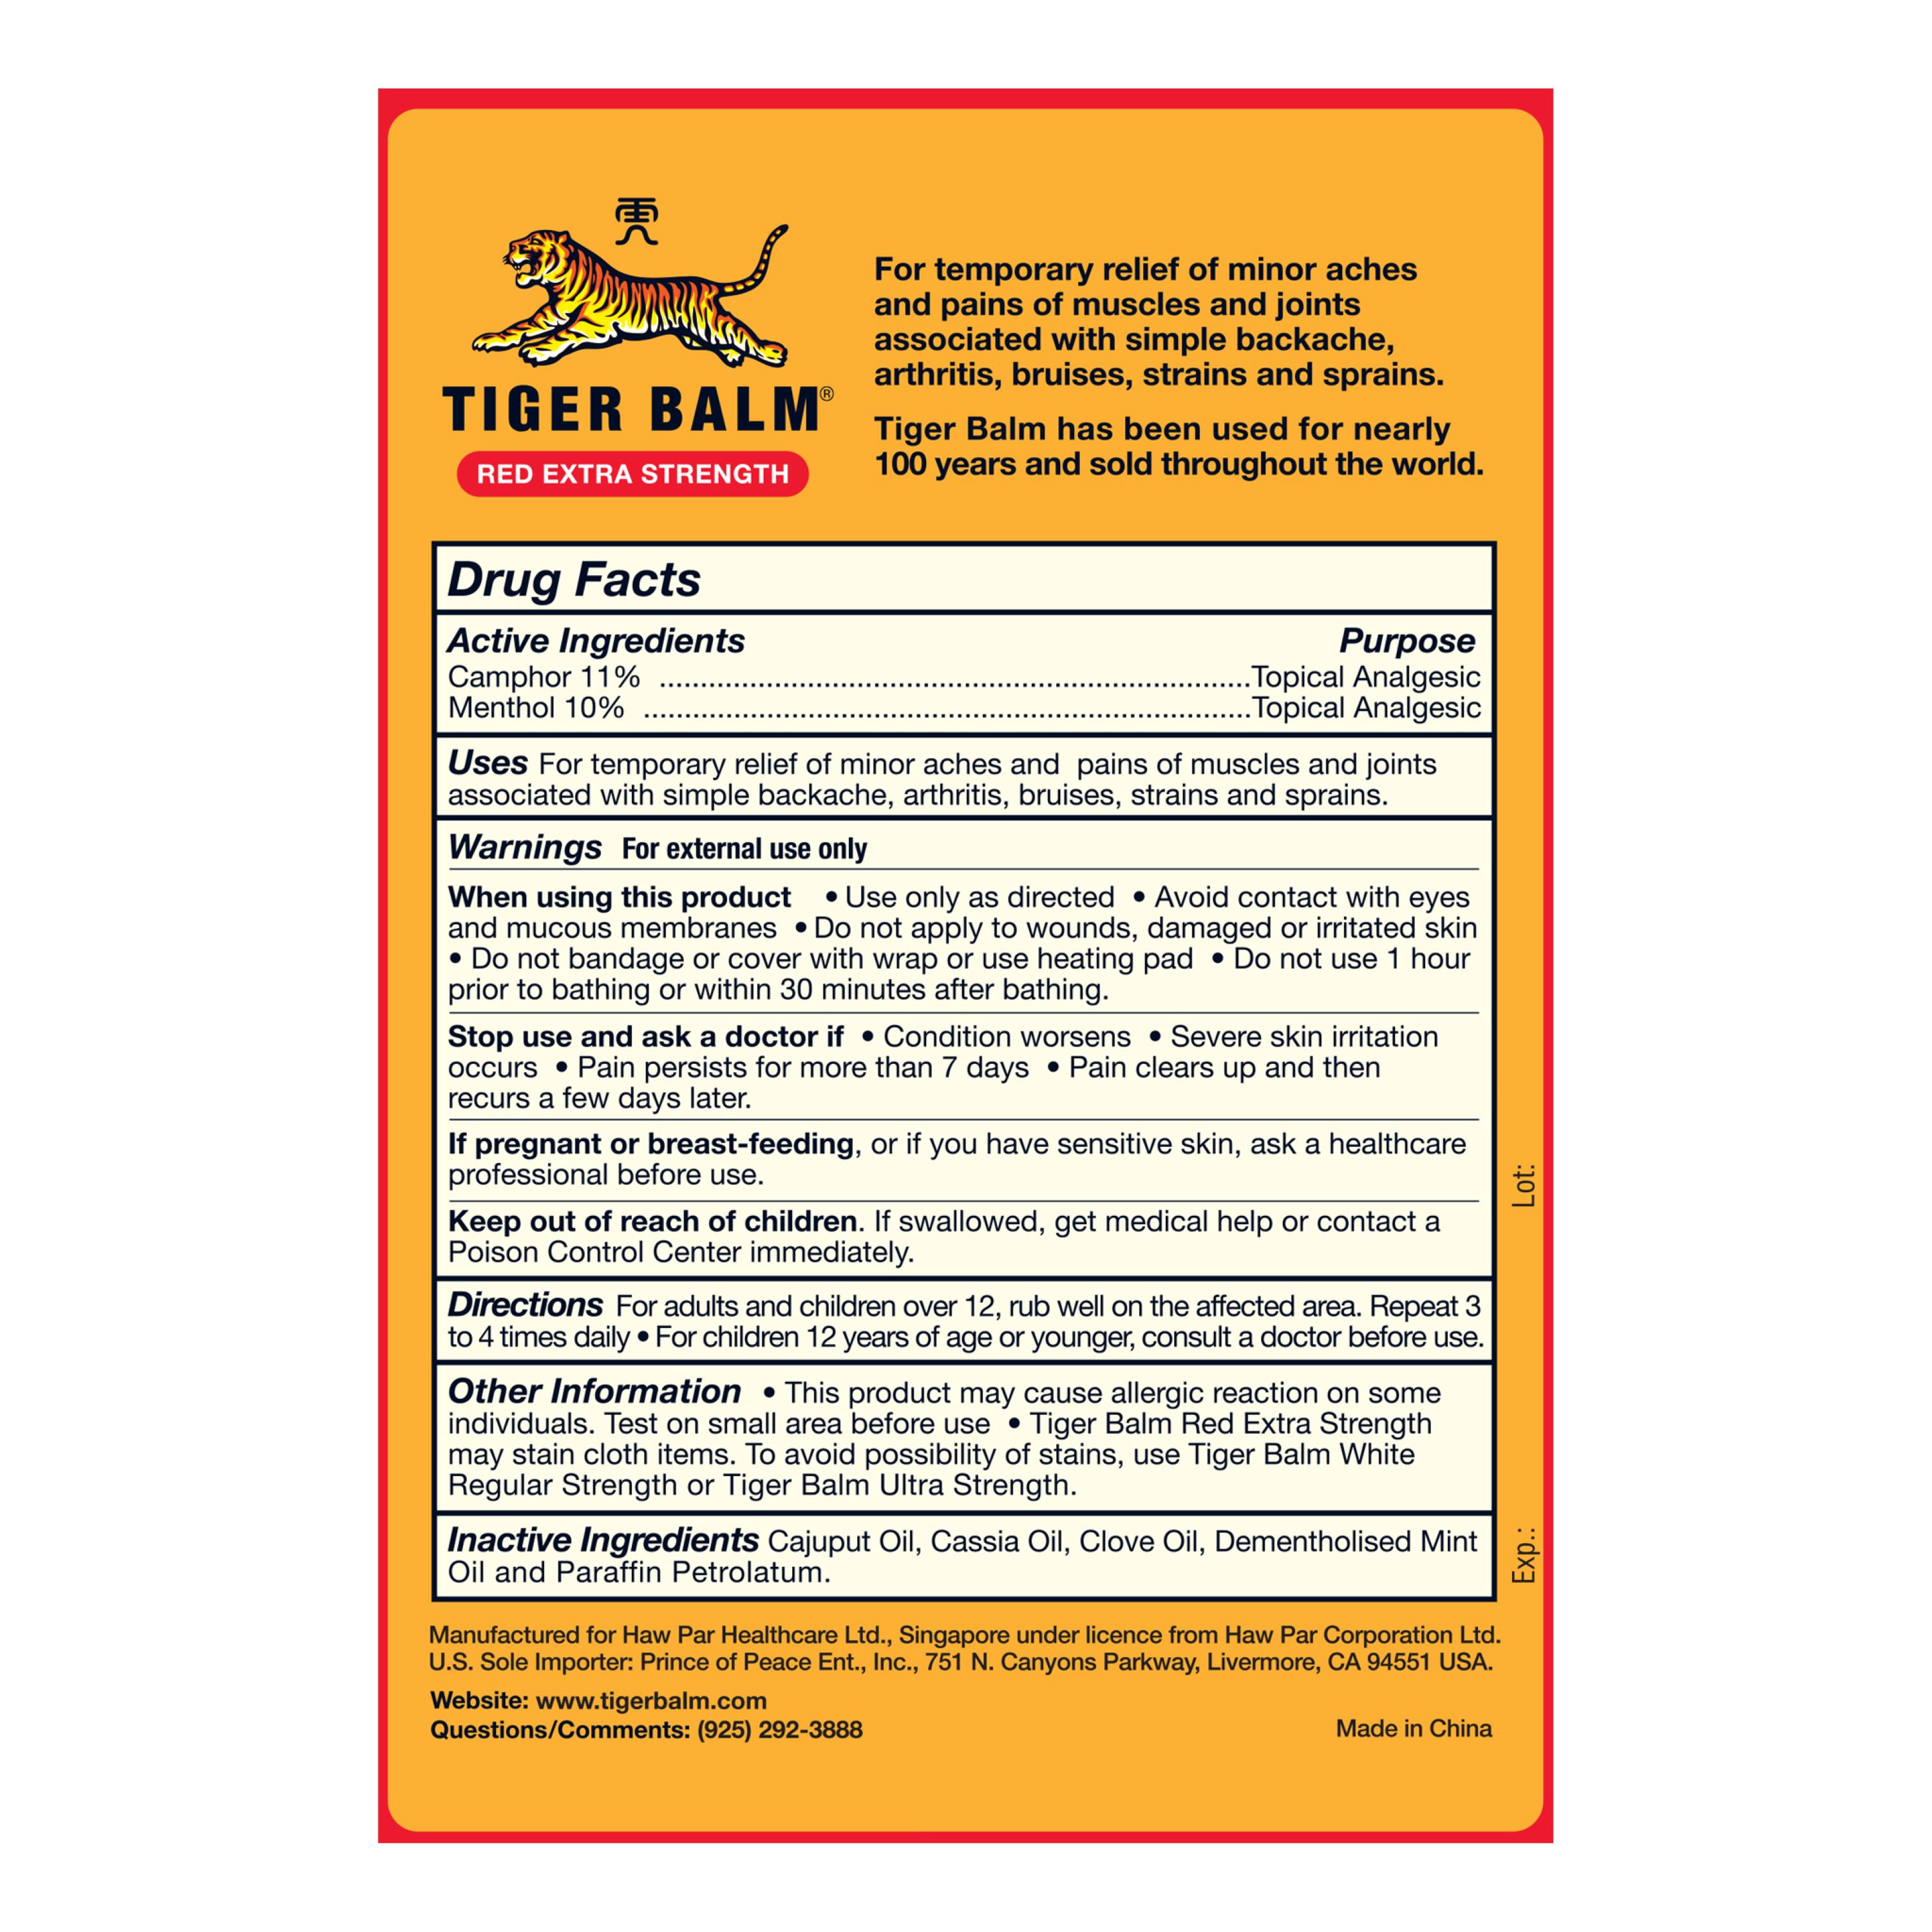 Tiger Balm Extra Strength Pain Relieving Ointment, 0.63 oz Jar for Arthritis Joint Pain Backaches Strains and Sore Muscles - image 3 of 9